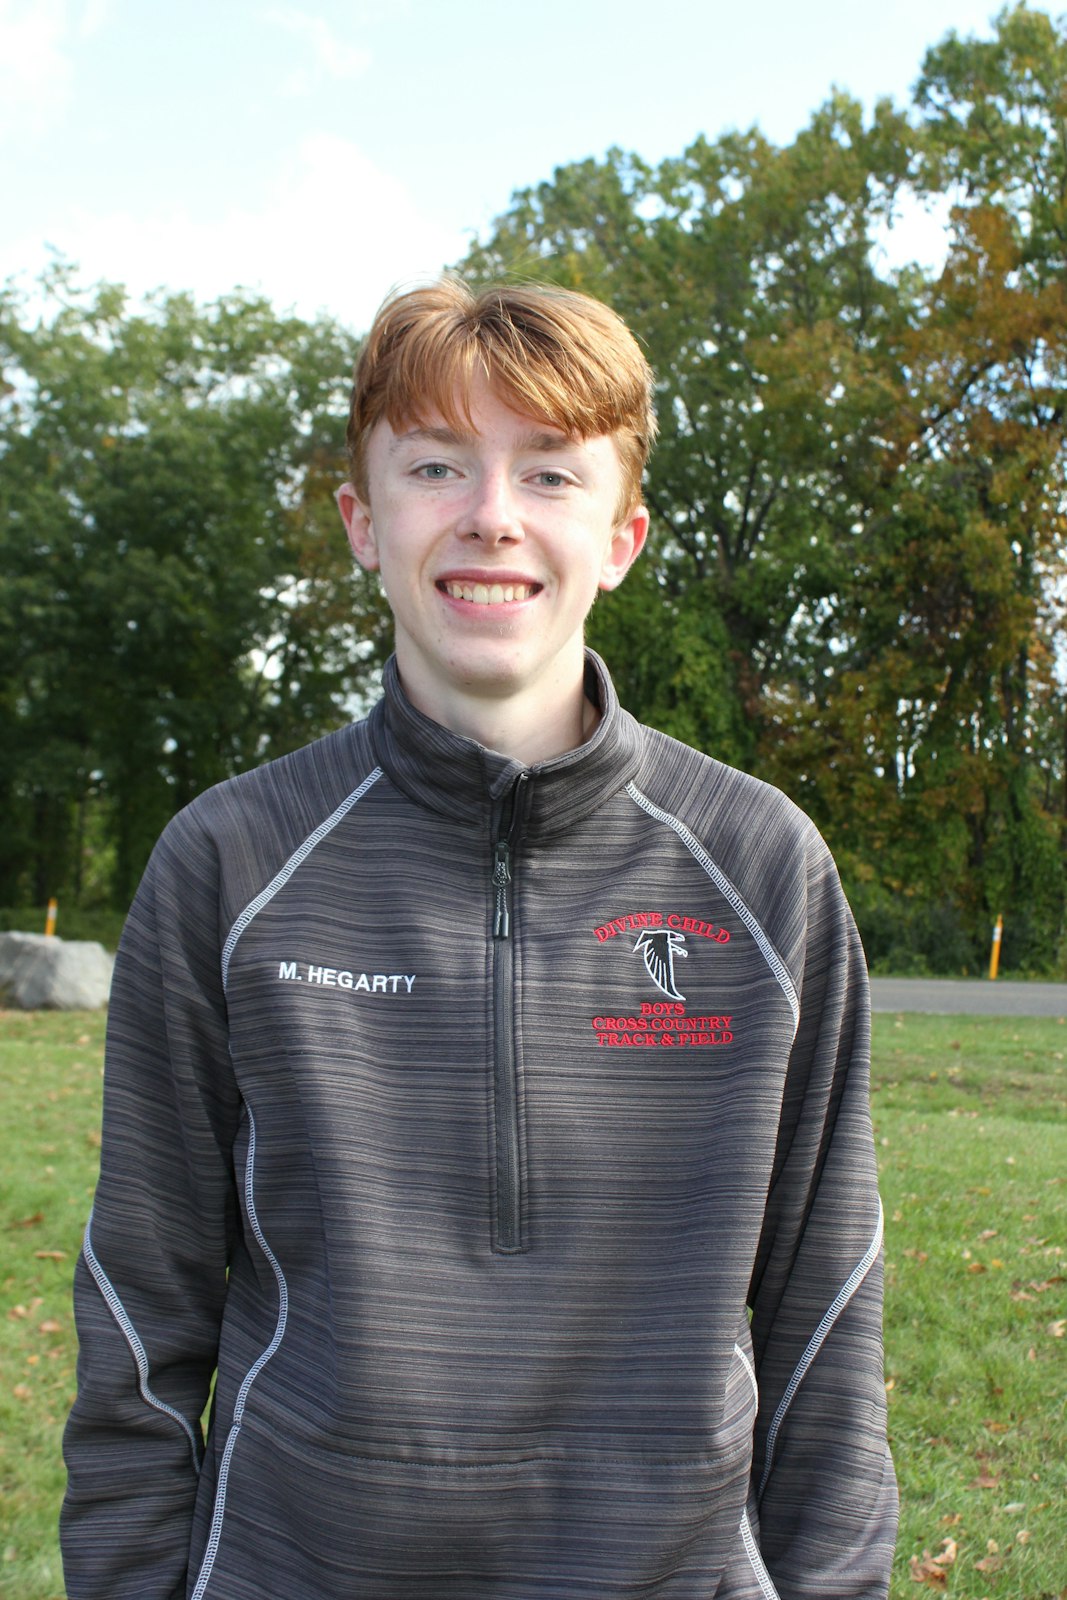 Dearborn Divine Child junior Michael Hegarty won the Bishop Division race for the second season in a row, with a time of 16:22.6.